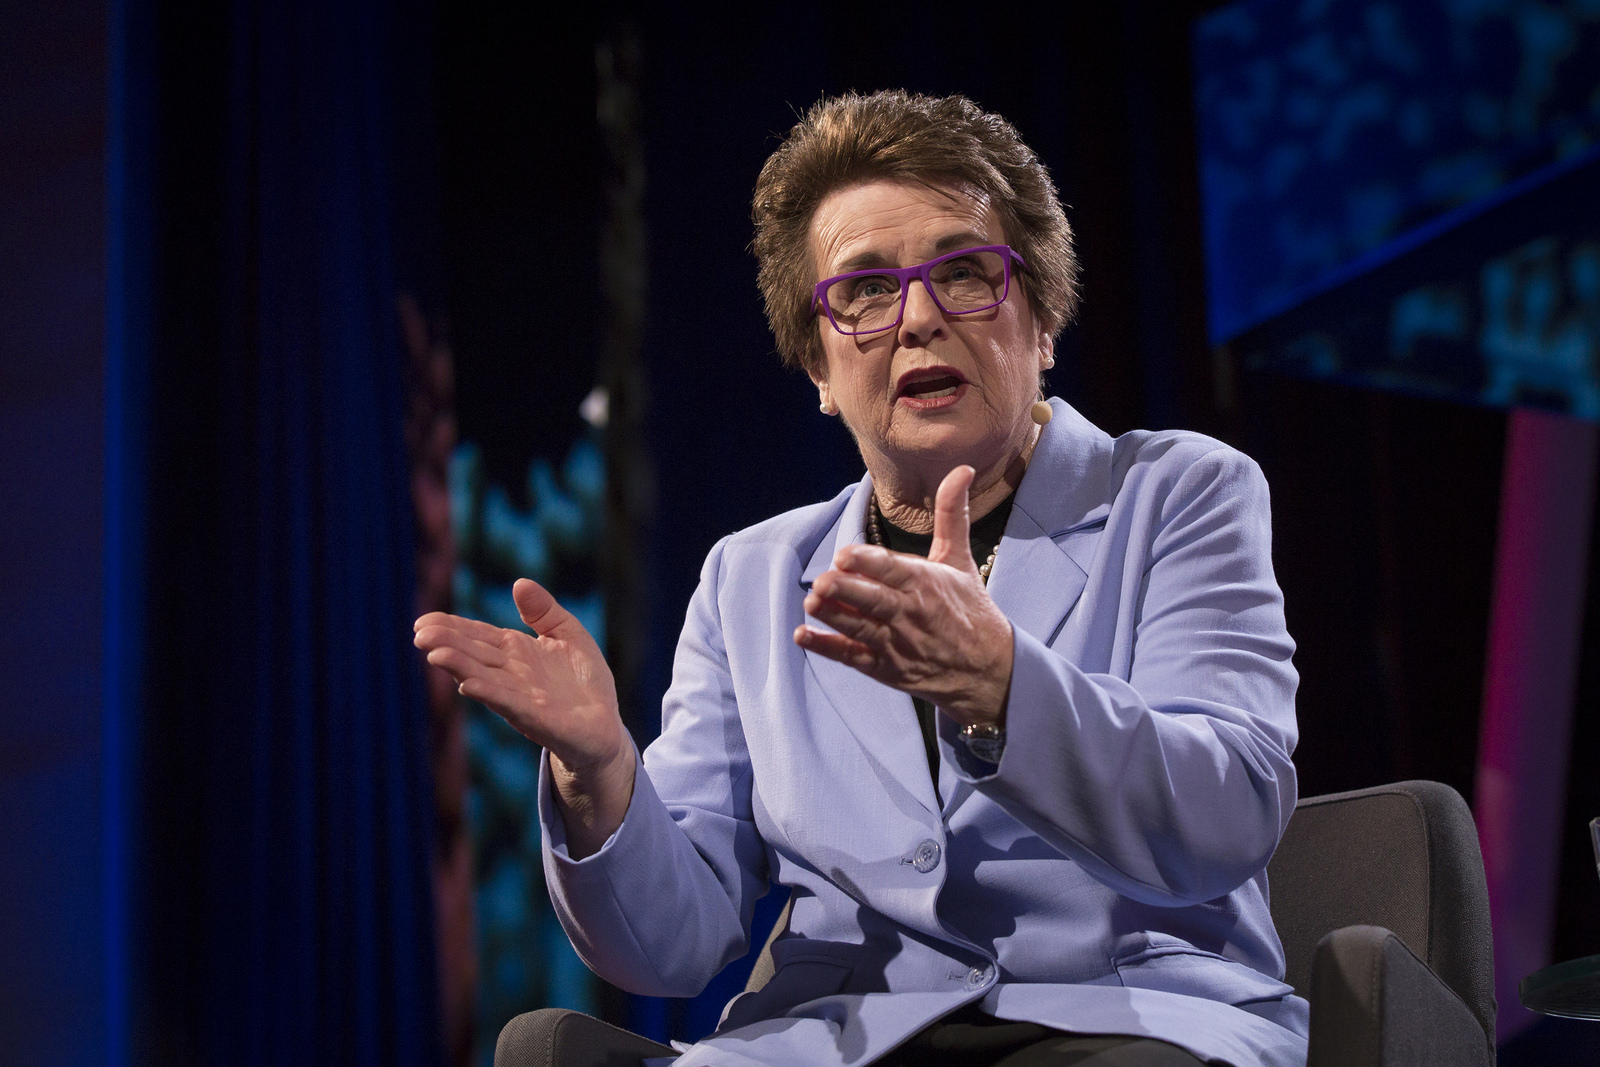 Tennis legend Billie Jean King shared how she felt going into the Battle of the Sexes with Bobby Riggs. "I  beat Bobby Riggs because I respected him," she said. Photo: Marla Aufmuth/TED